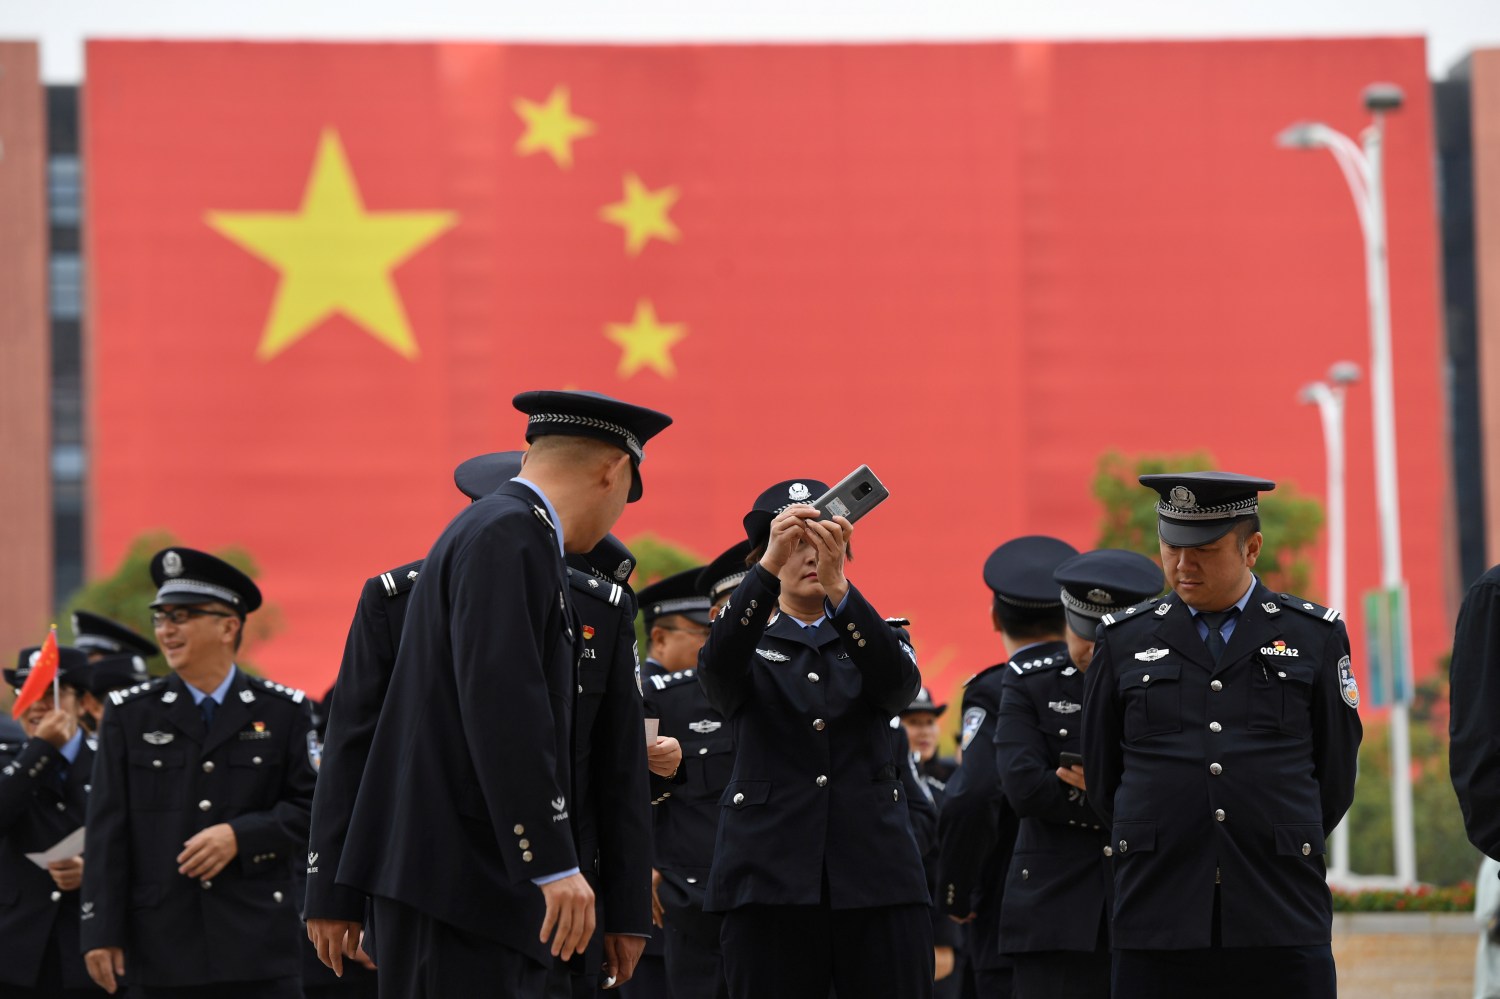 A police officer in front of a giant Chinese flag takes pictures with a mobile phone outside an exhibition marking the 70th founding anniversary of People's Republic of China, in Kunming, Yunnan province, China September 25, 2019. REUTERS/Stringer CHINA OUT.